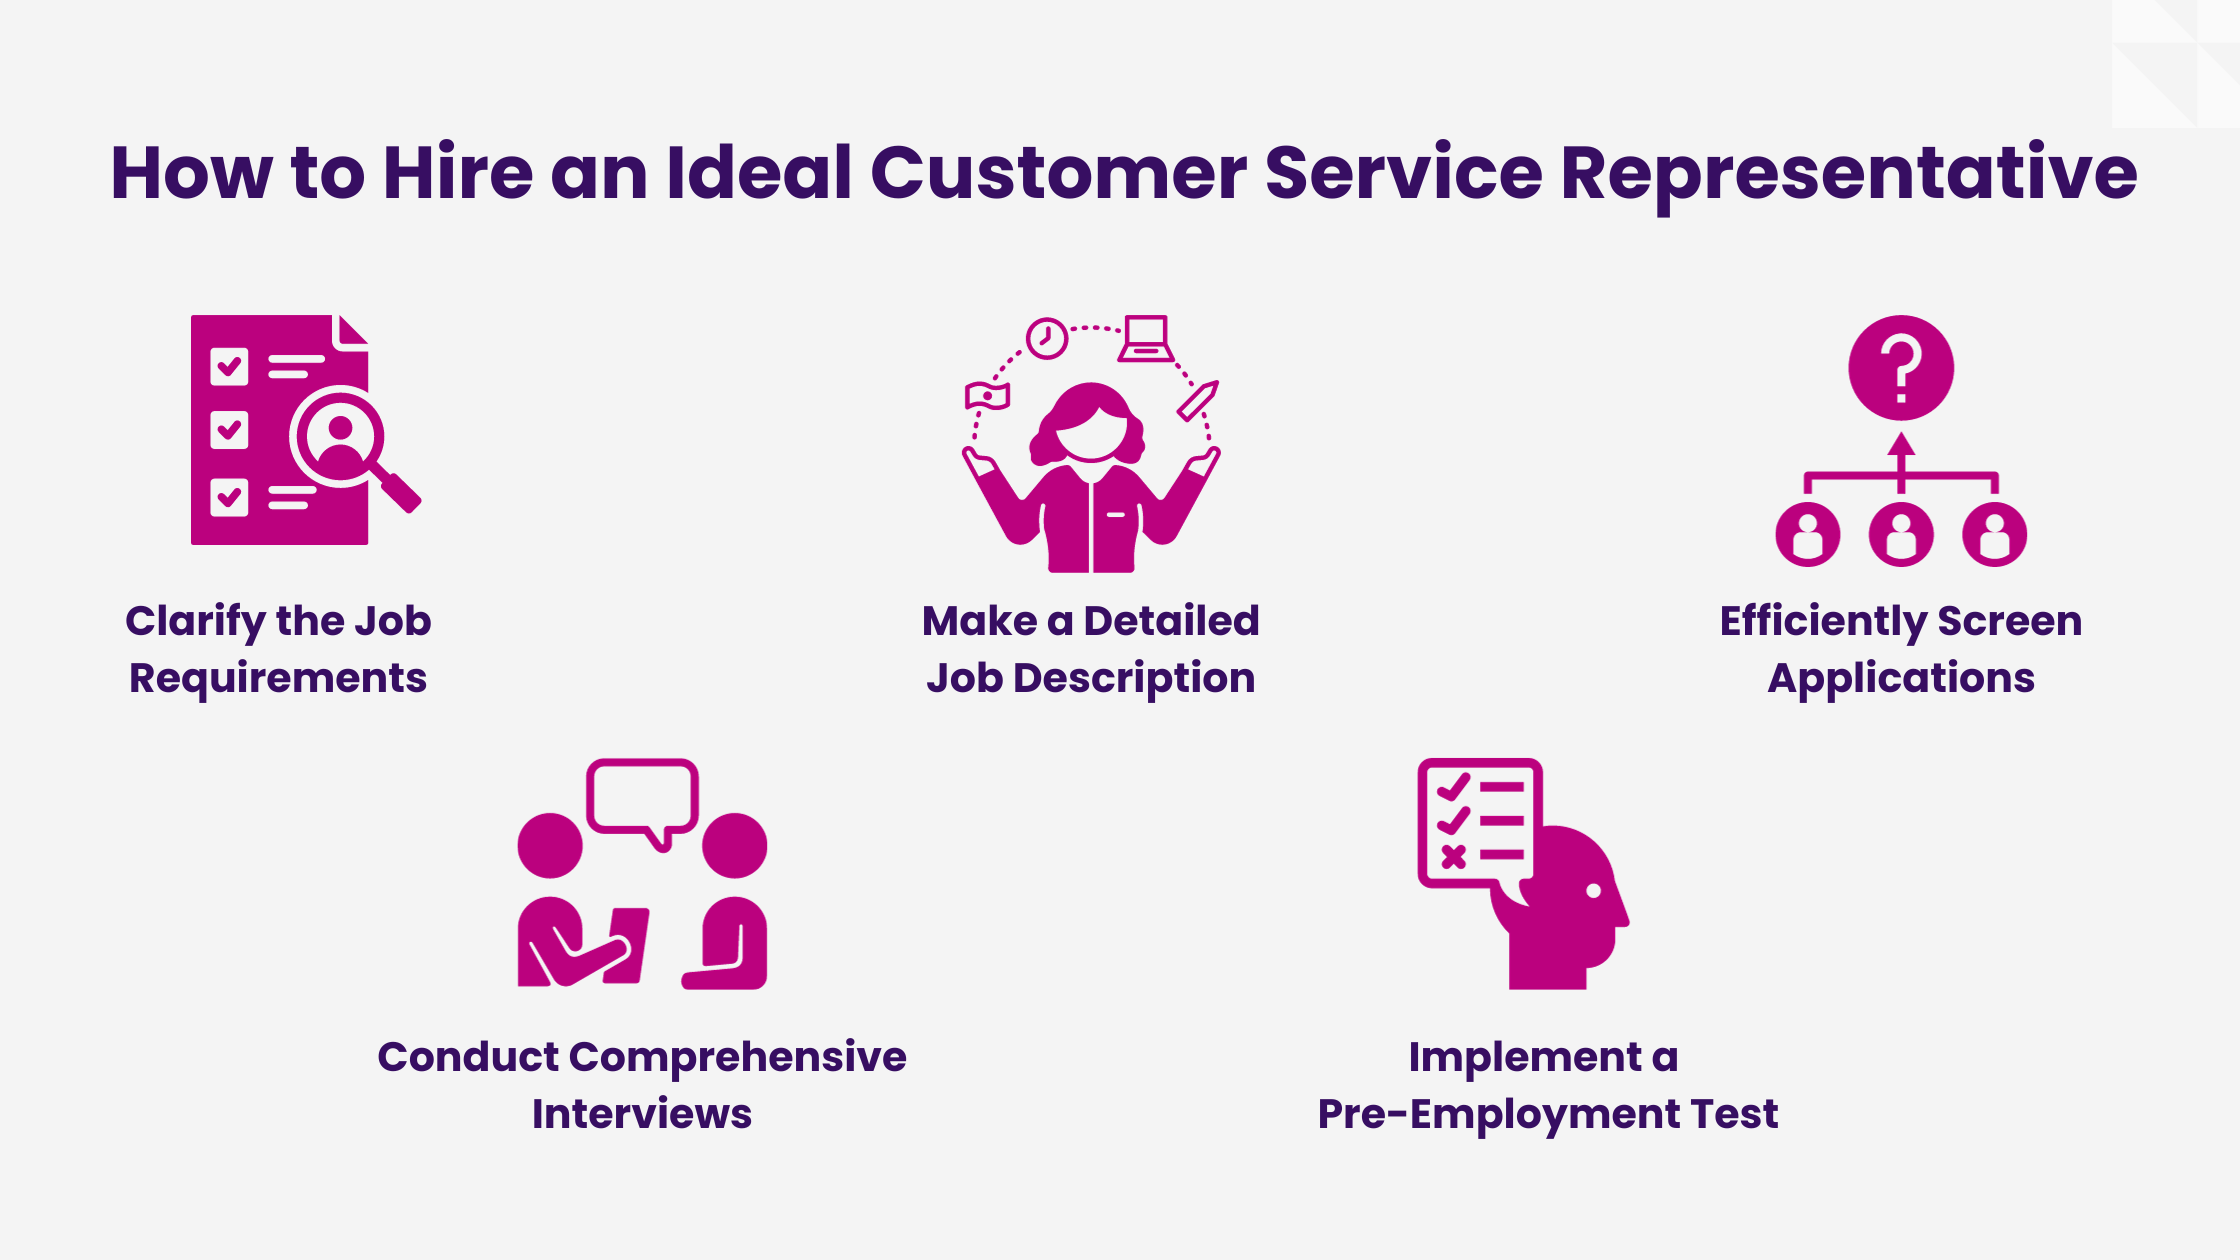 How To Hire an Ideal Customer Service Representative